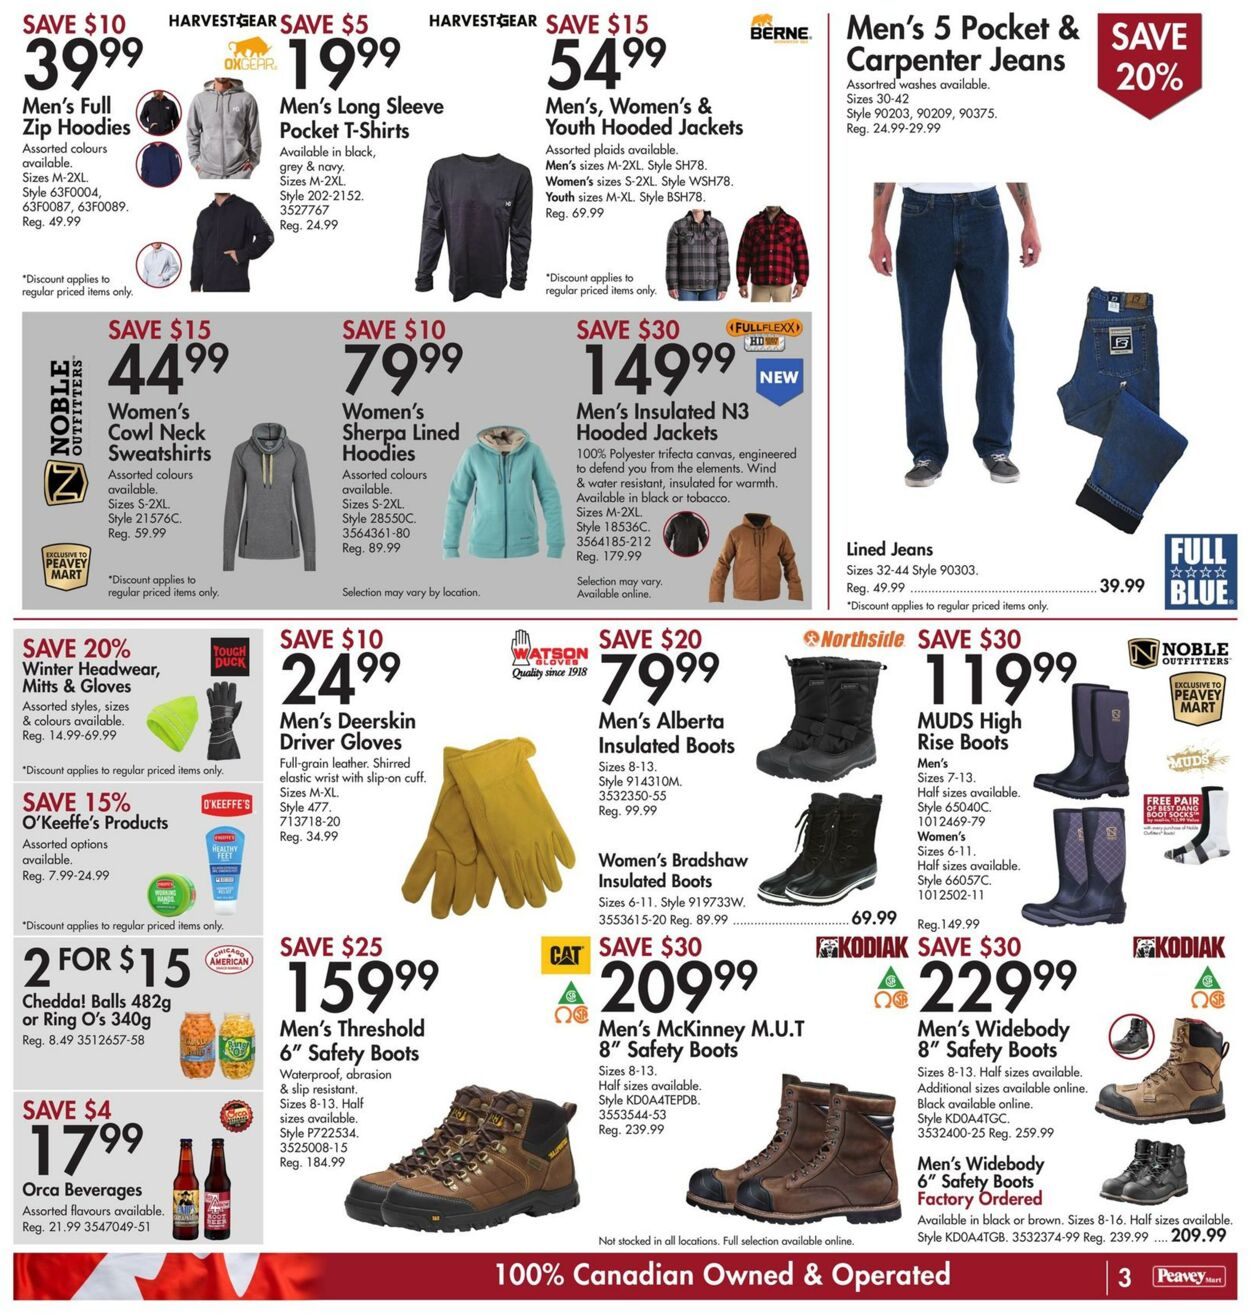 Peavey Mart Flyer from 10/27/2023